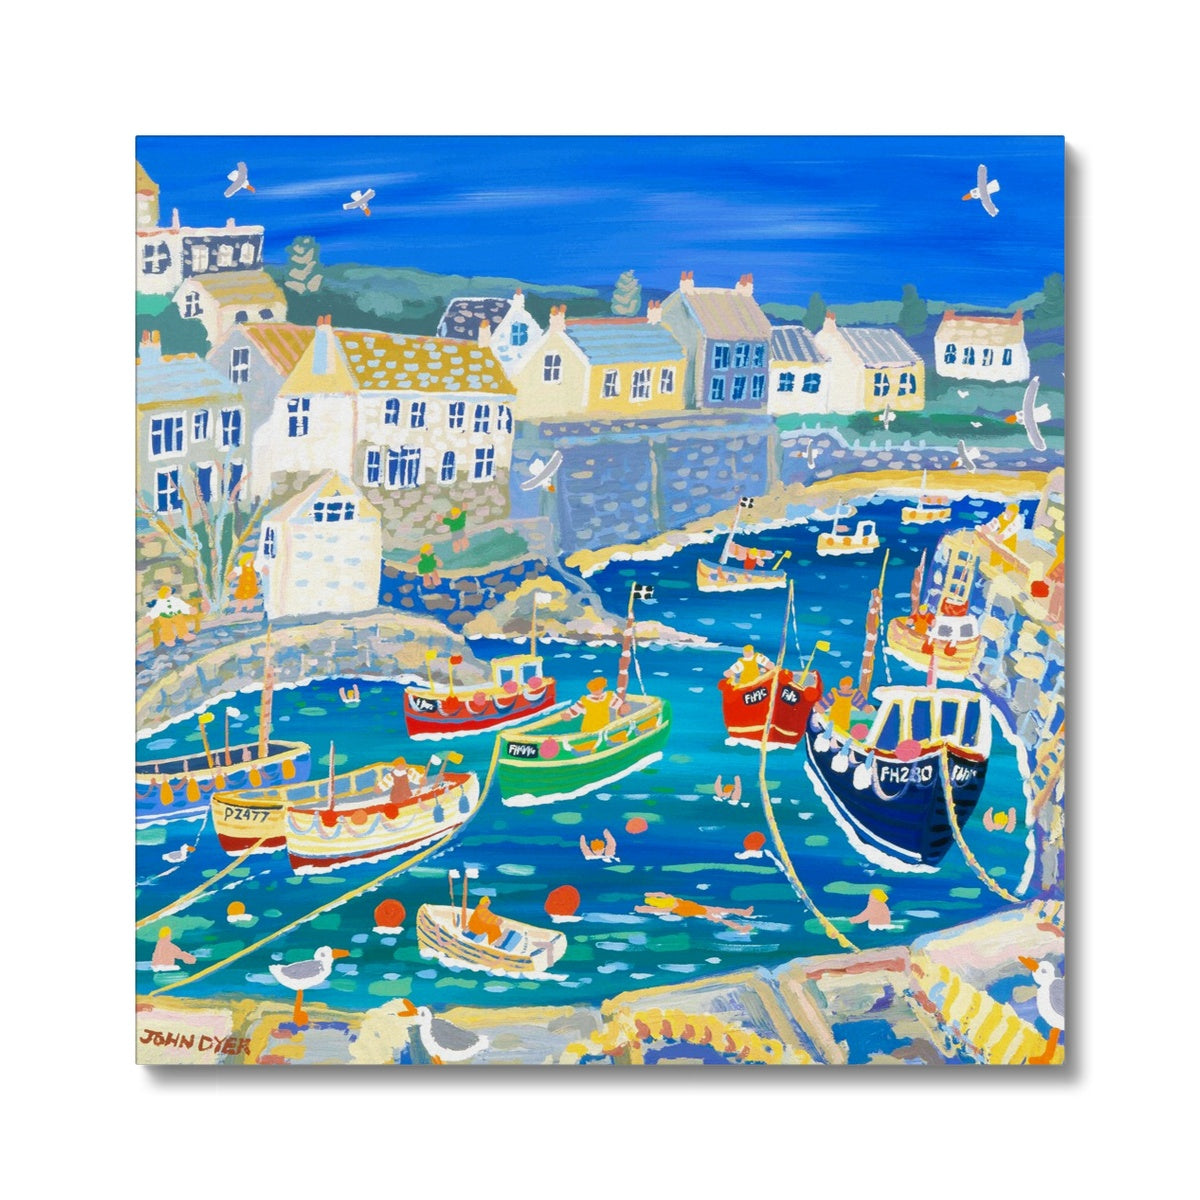 Unloading the Catch, Coverack. Canvas Art Print by John Dyer